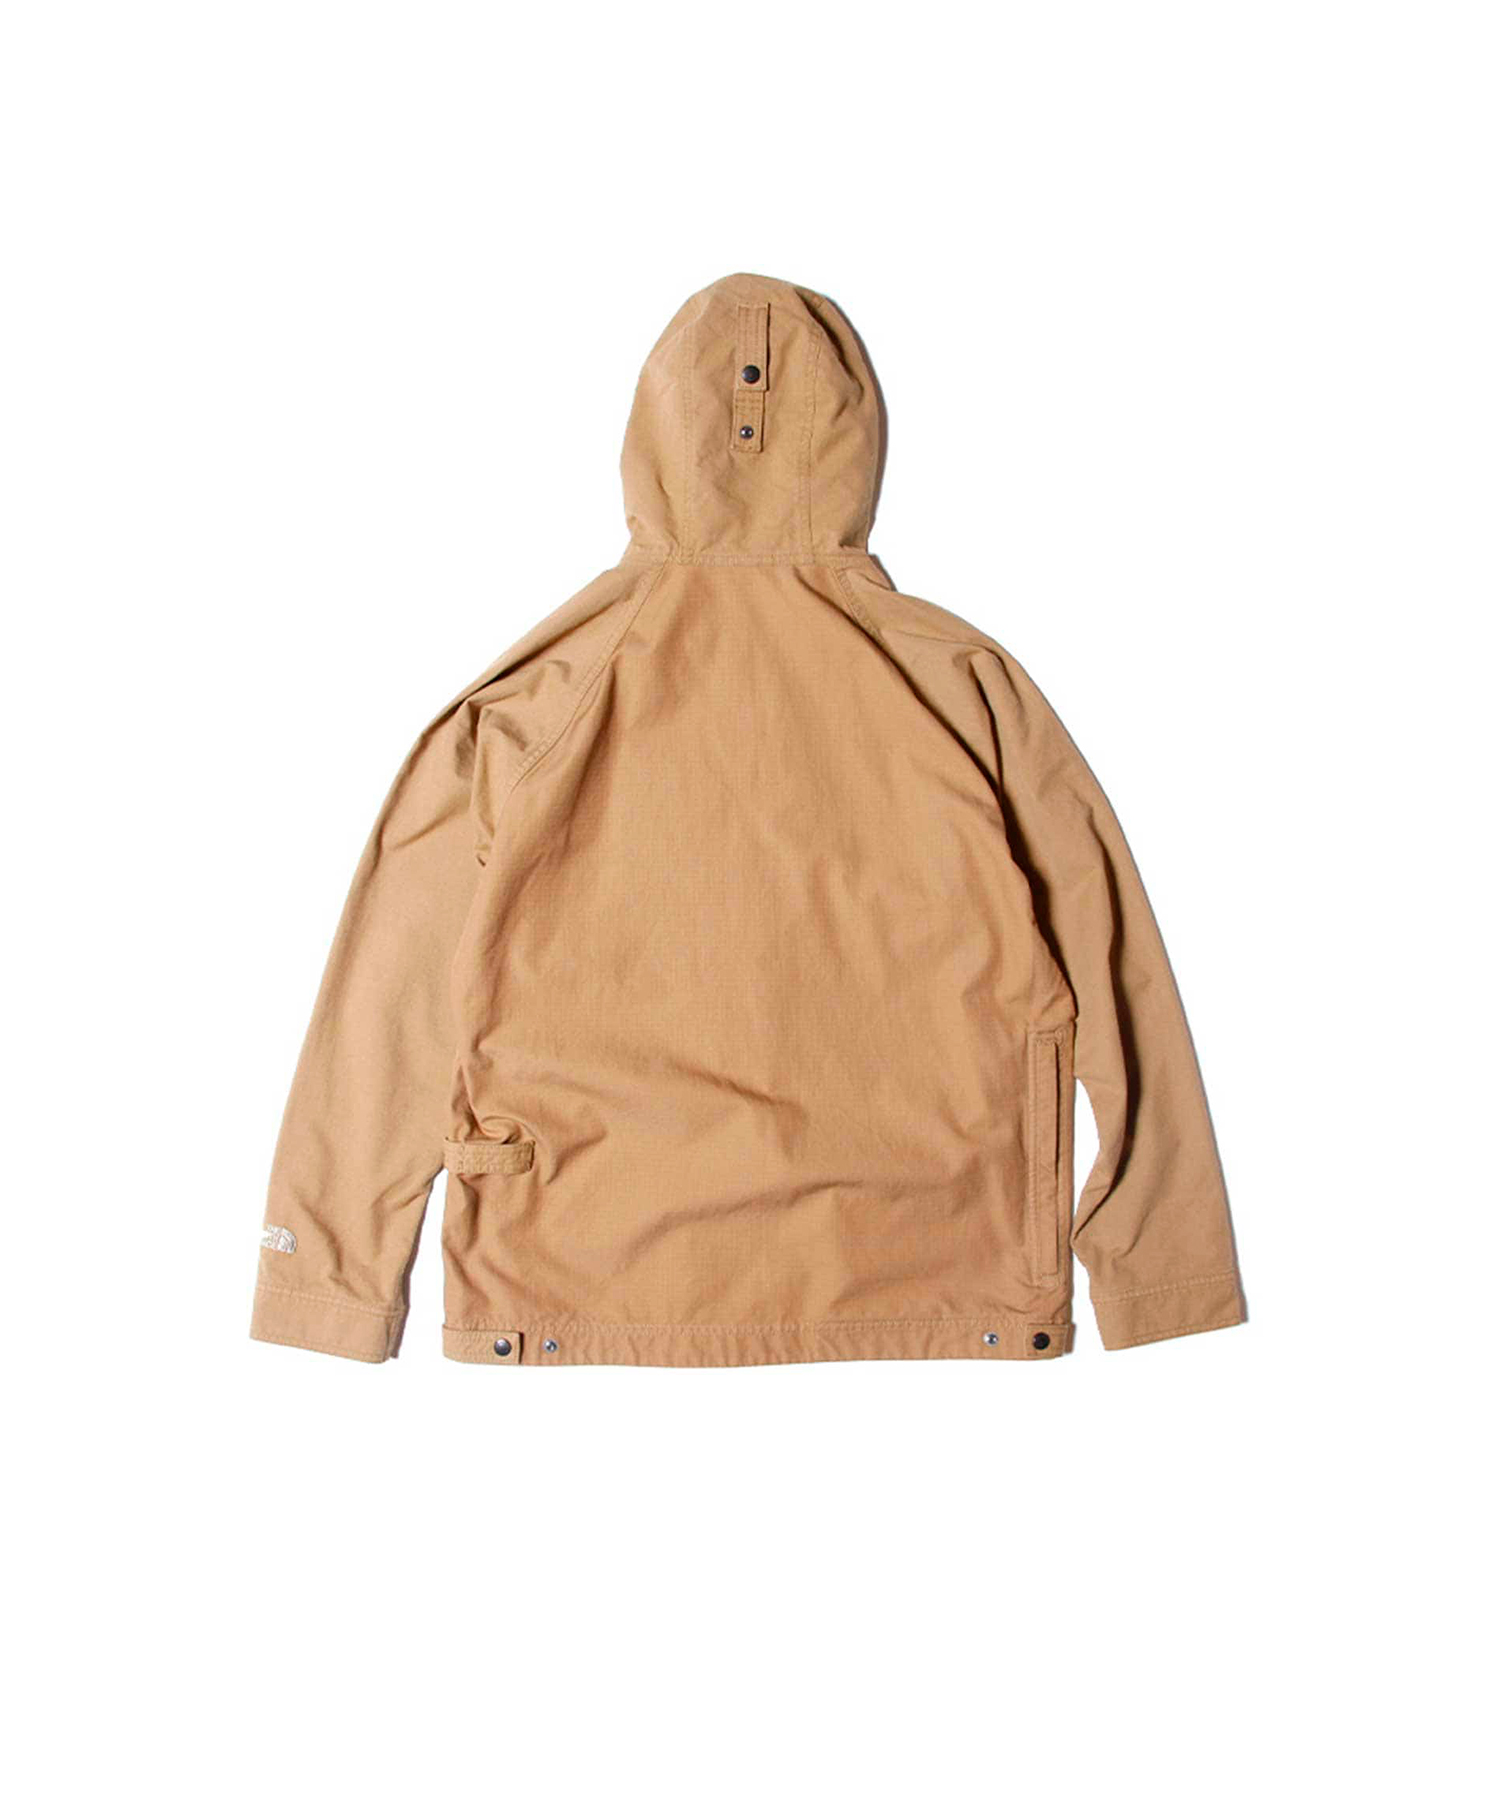 THE NORTH FACE FIREFLY JACKET / ザ・ノースフェイス ファイヤー